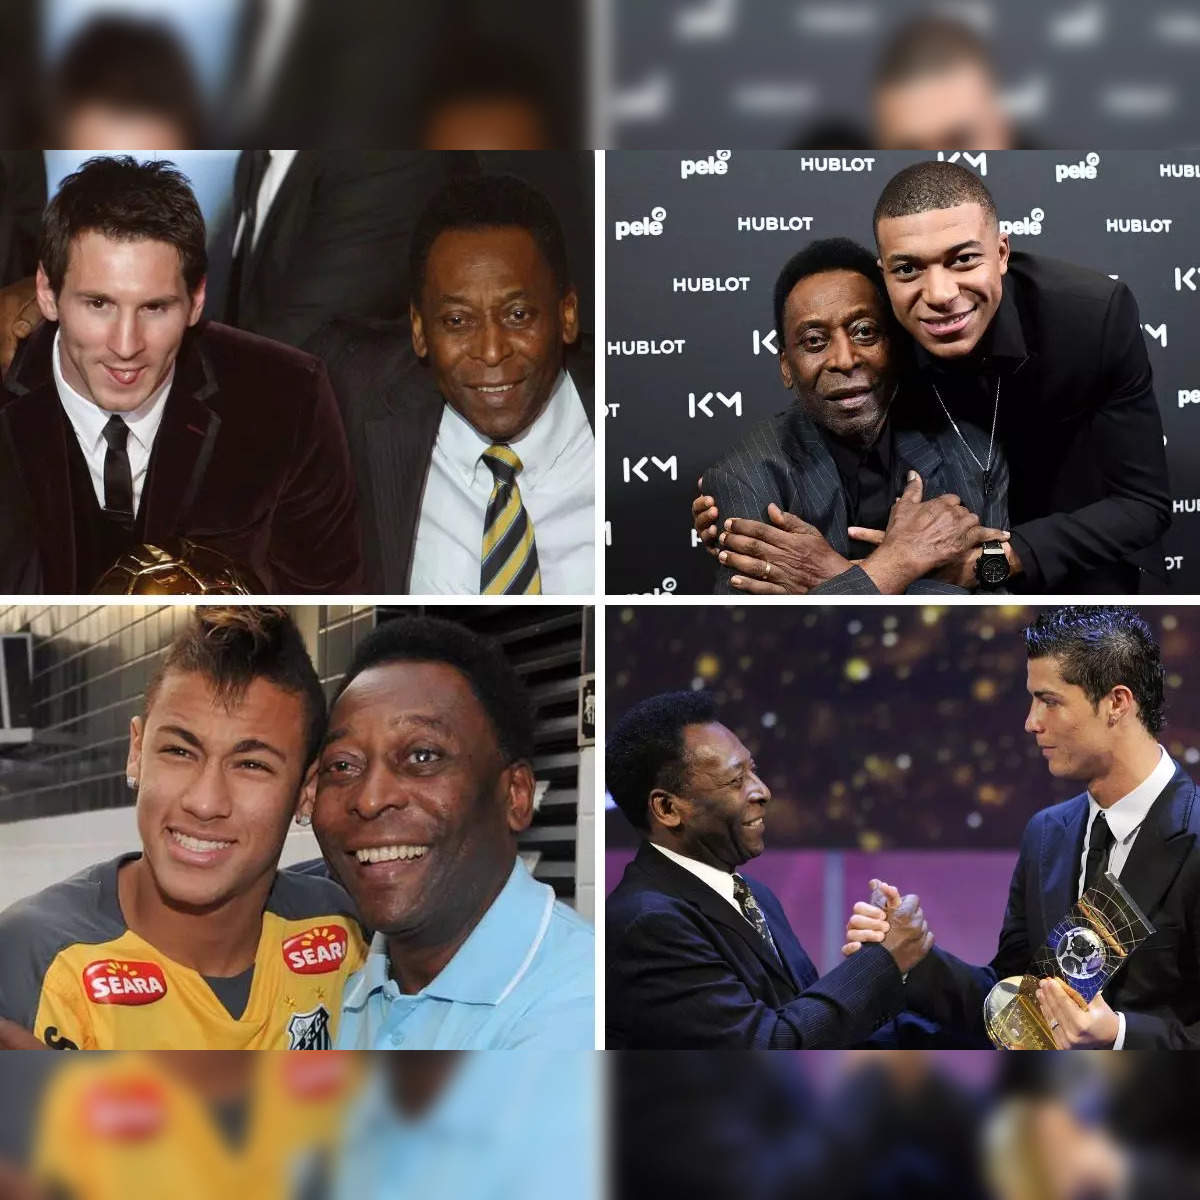 Kylian Mbappe and Usain Bolt lead tributes to Pele after his death